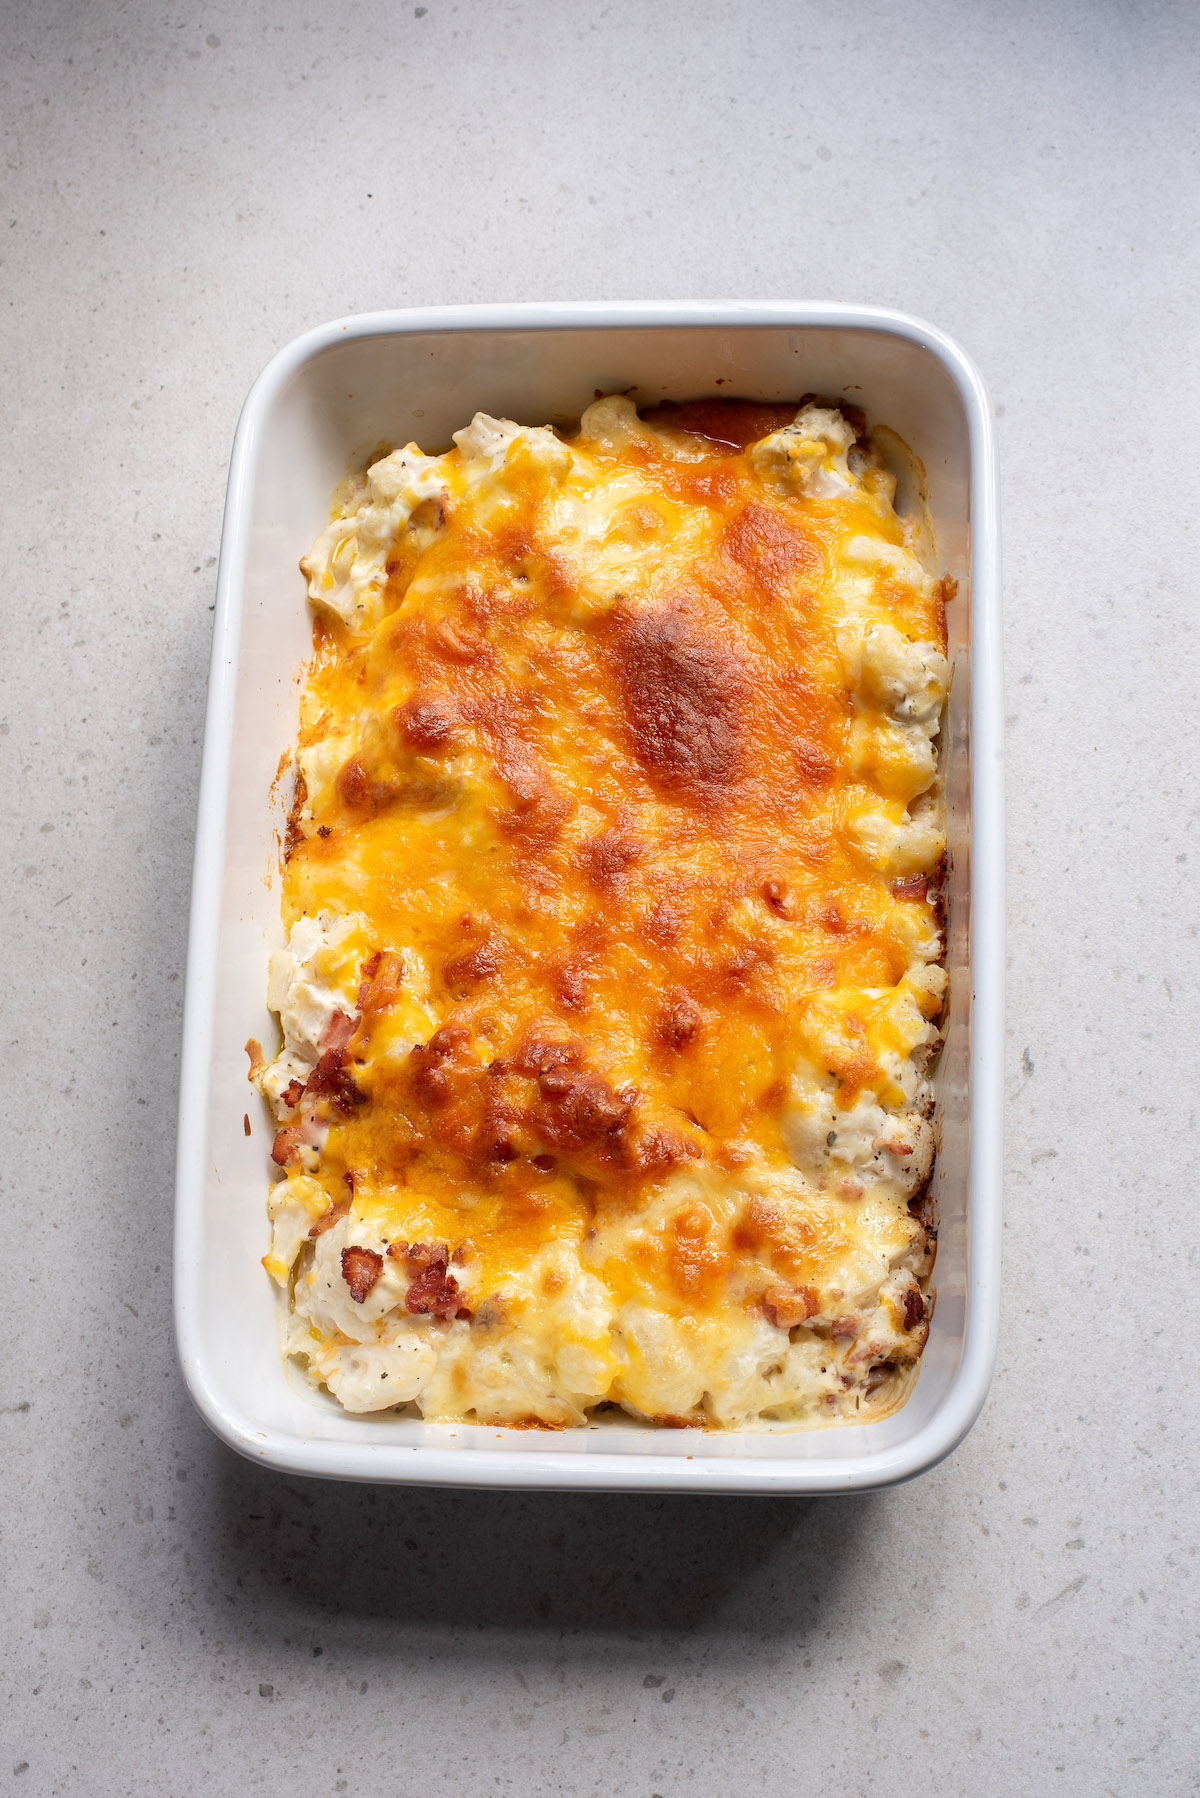 the baked casserole right out of the oven